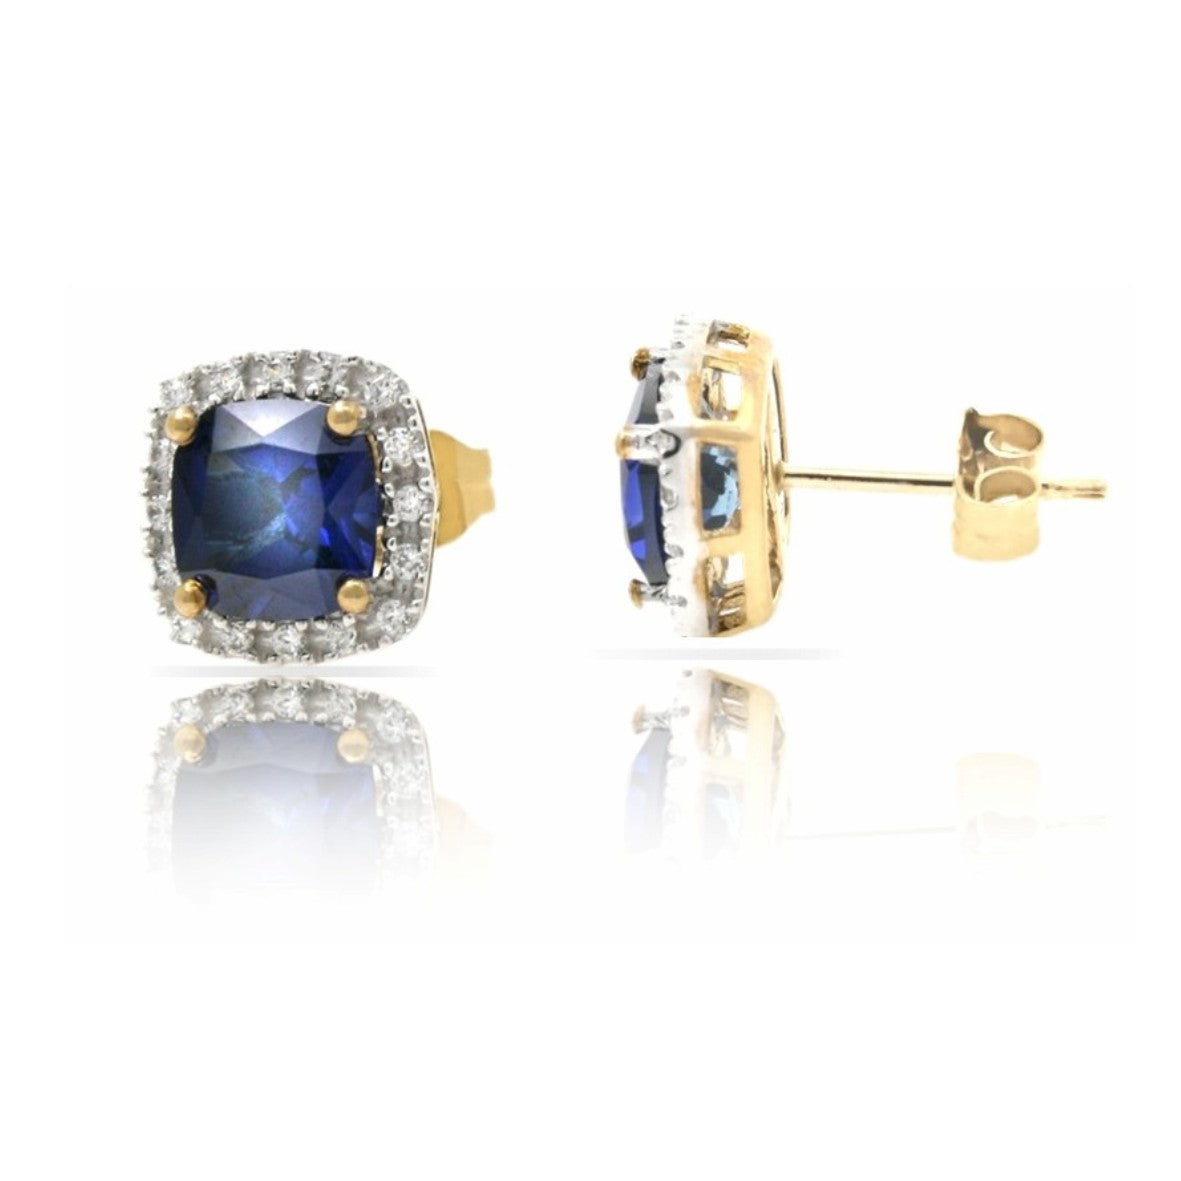 9ct Yellow Gold Cubic Zirconia & Created Sapphire Earrings